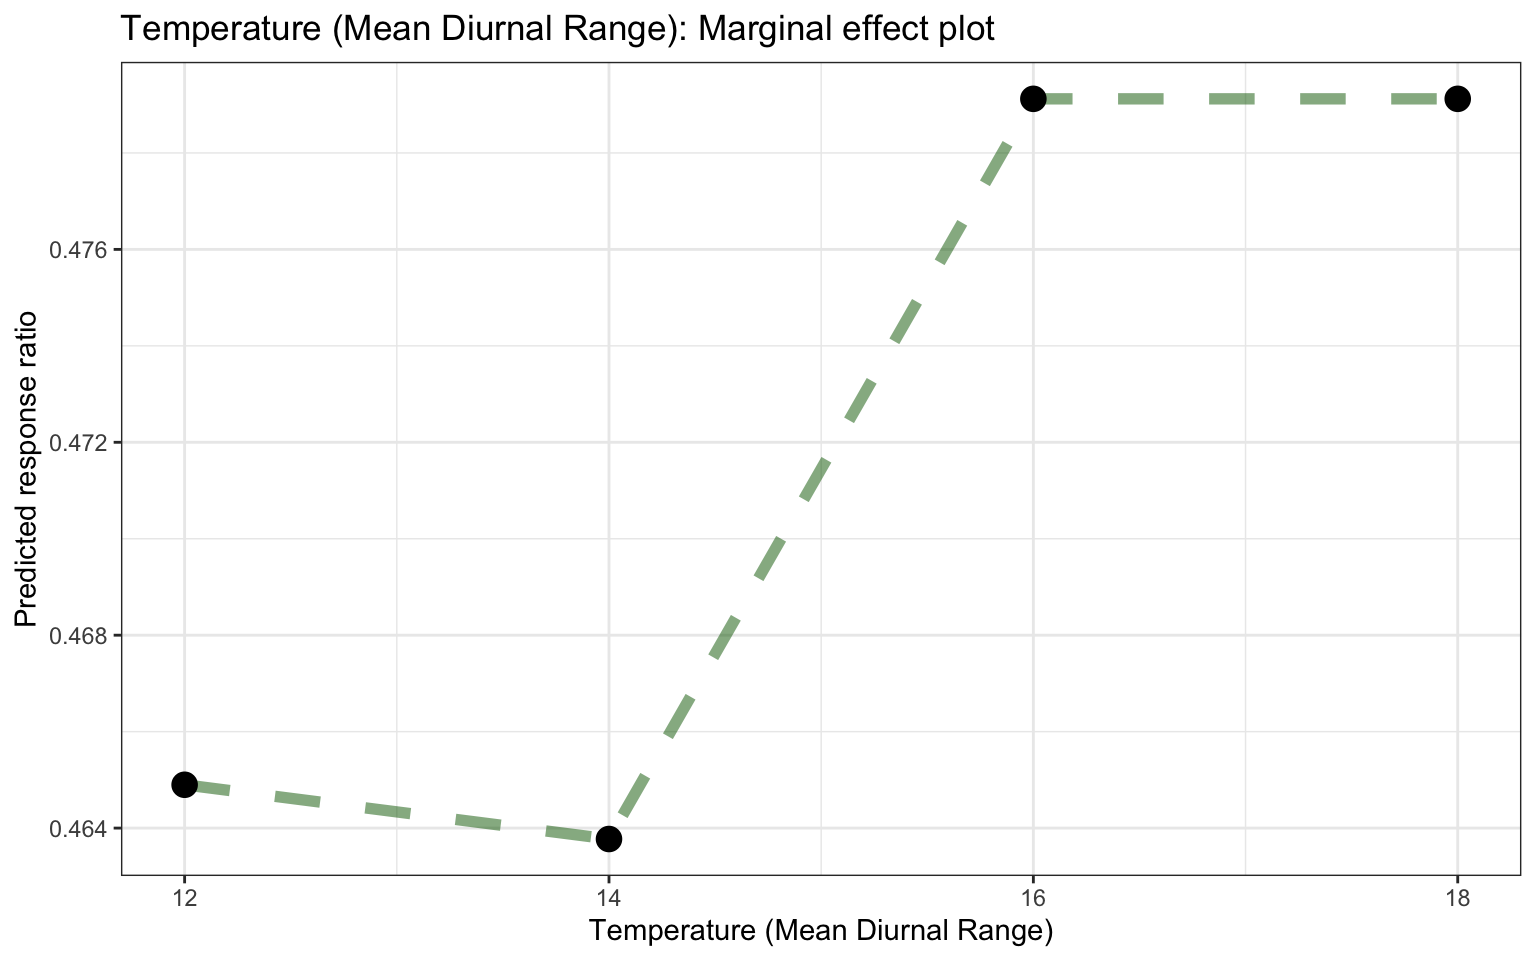 Marginal effects plot for temperature mean diurnal range based on the RF model